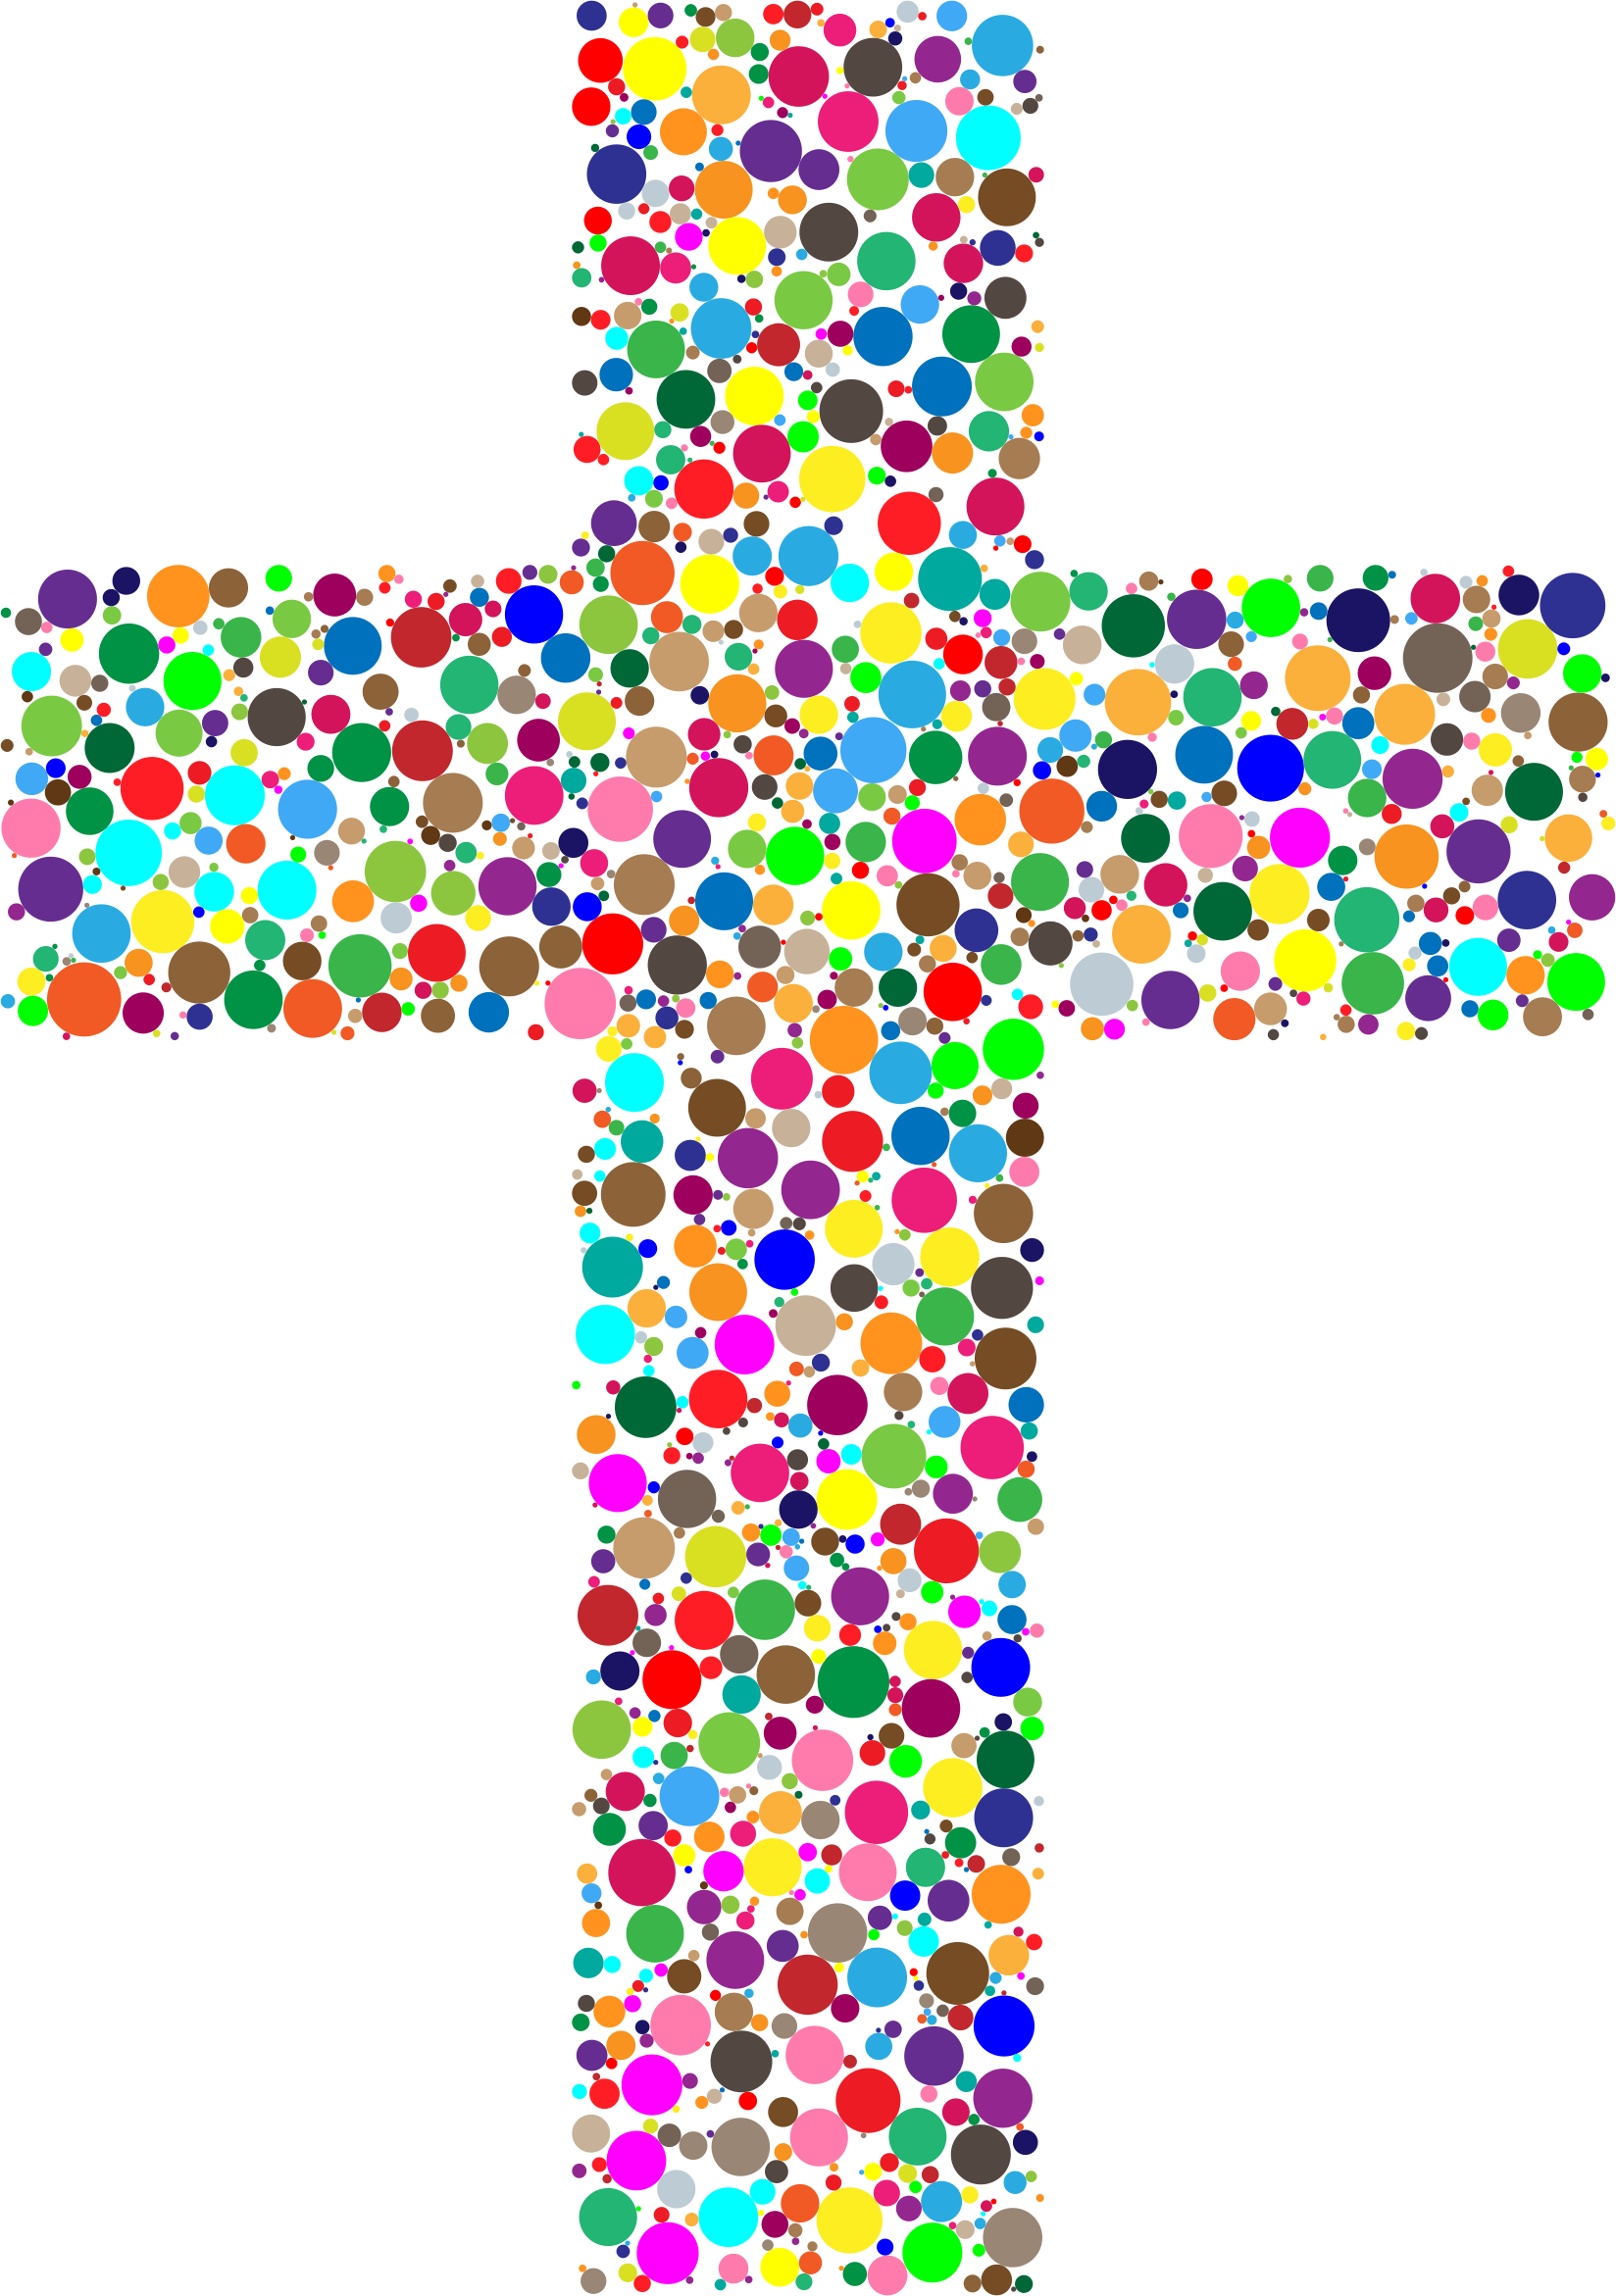 Clipart Colorful Cross Circles Rh Openclipart Org Colorful - Colorful Cross Clipart (1648x2342)